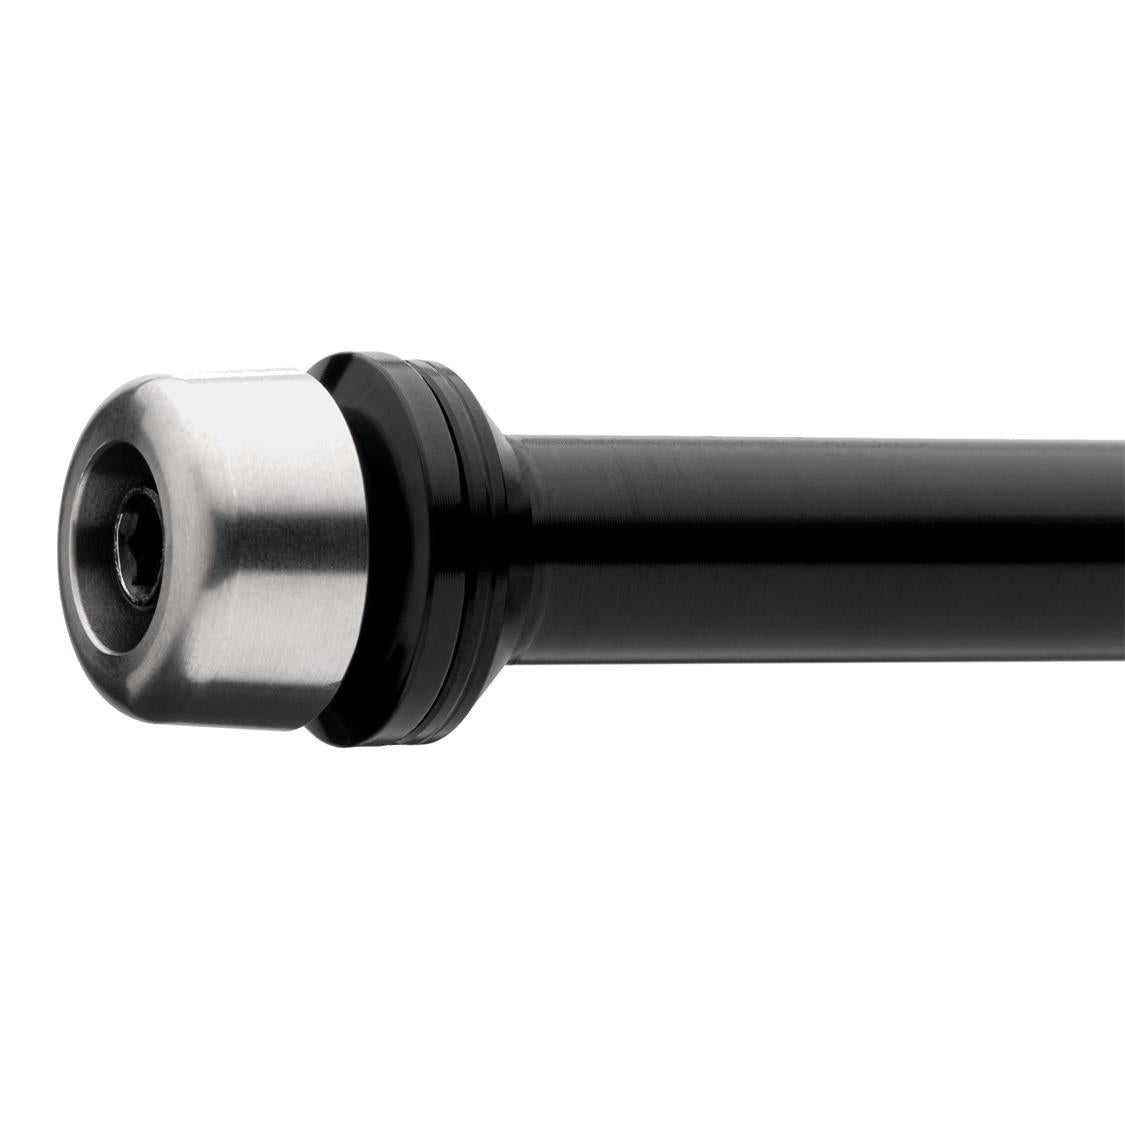 Cannondale Trainer Axle 142x12 Syntace 160mm